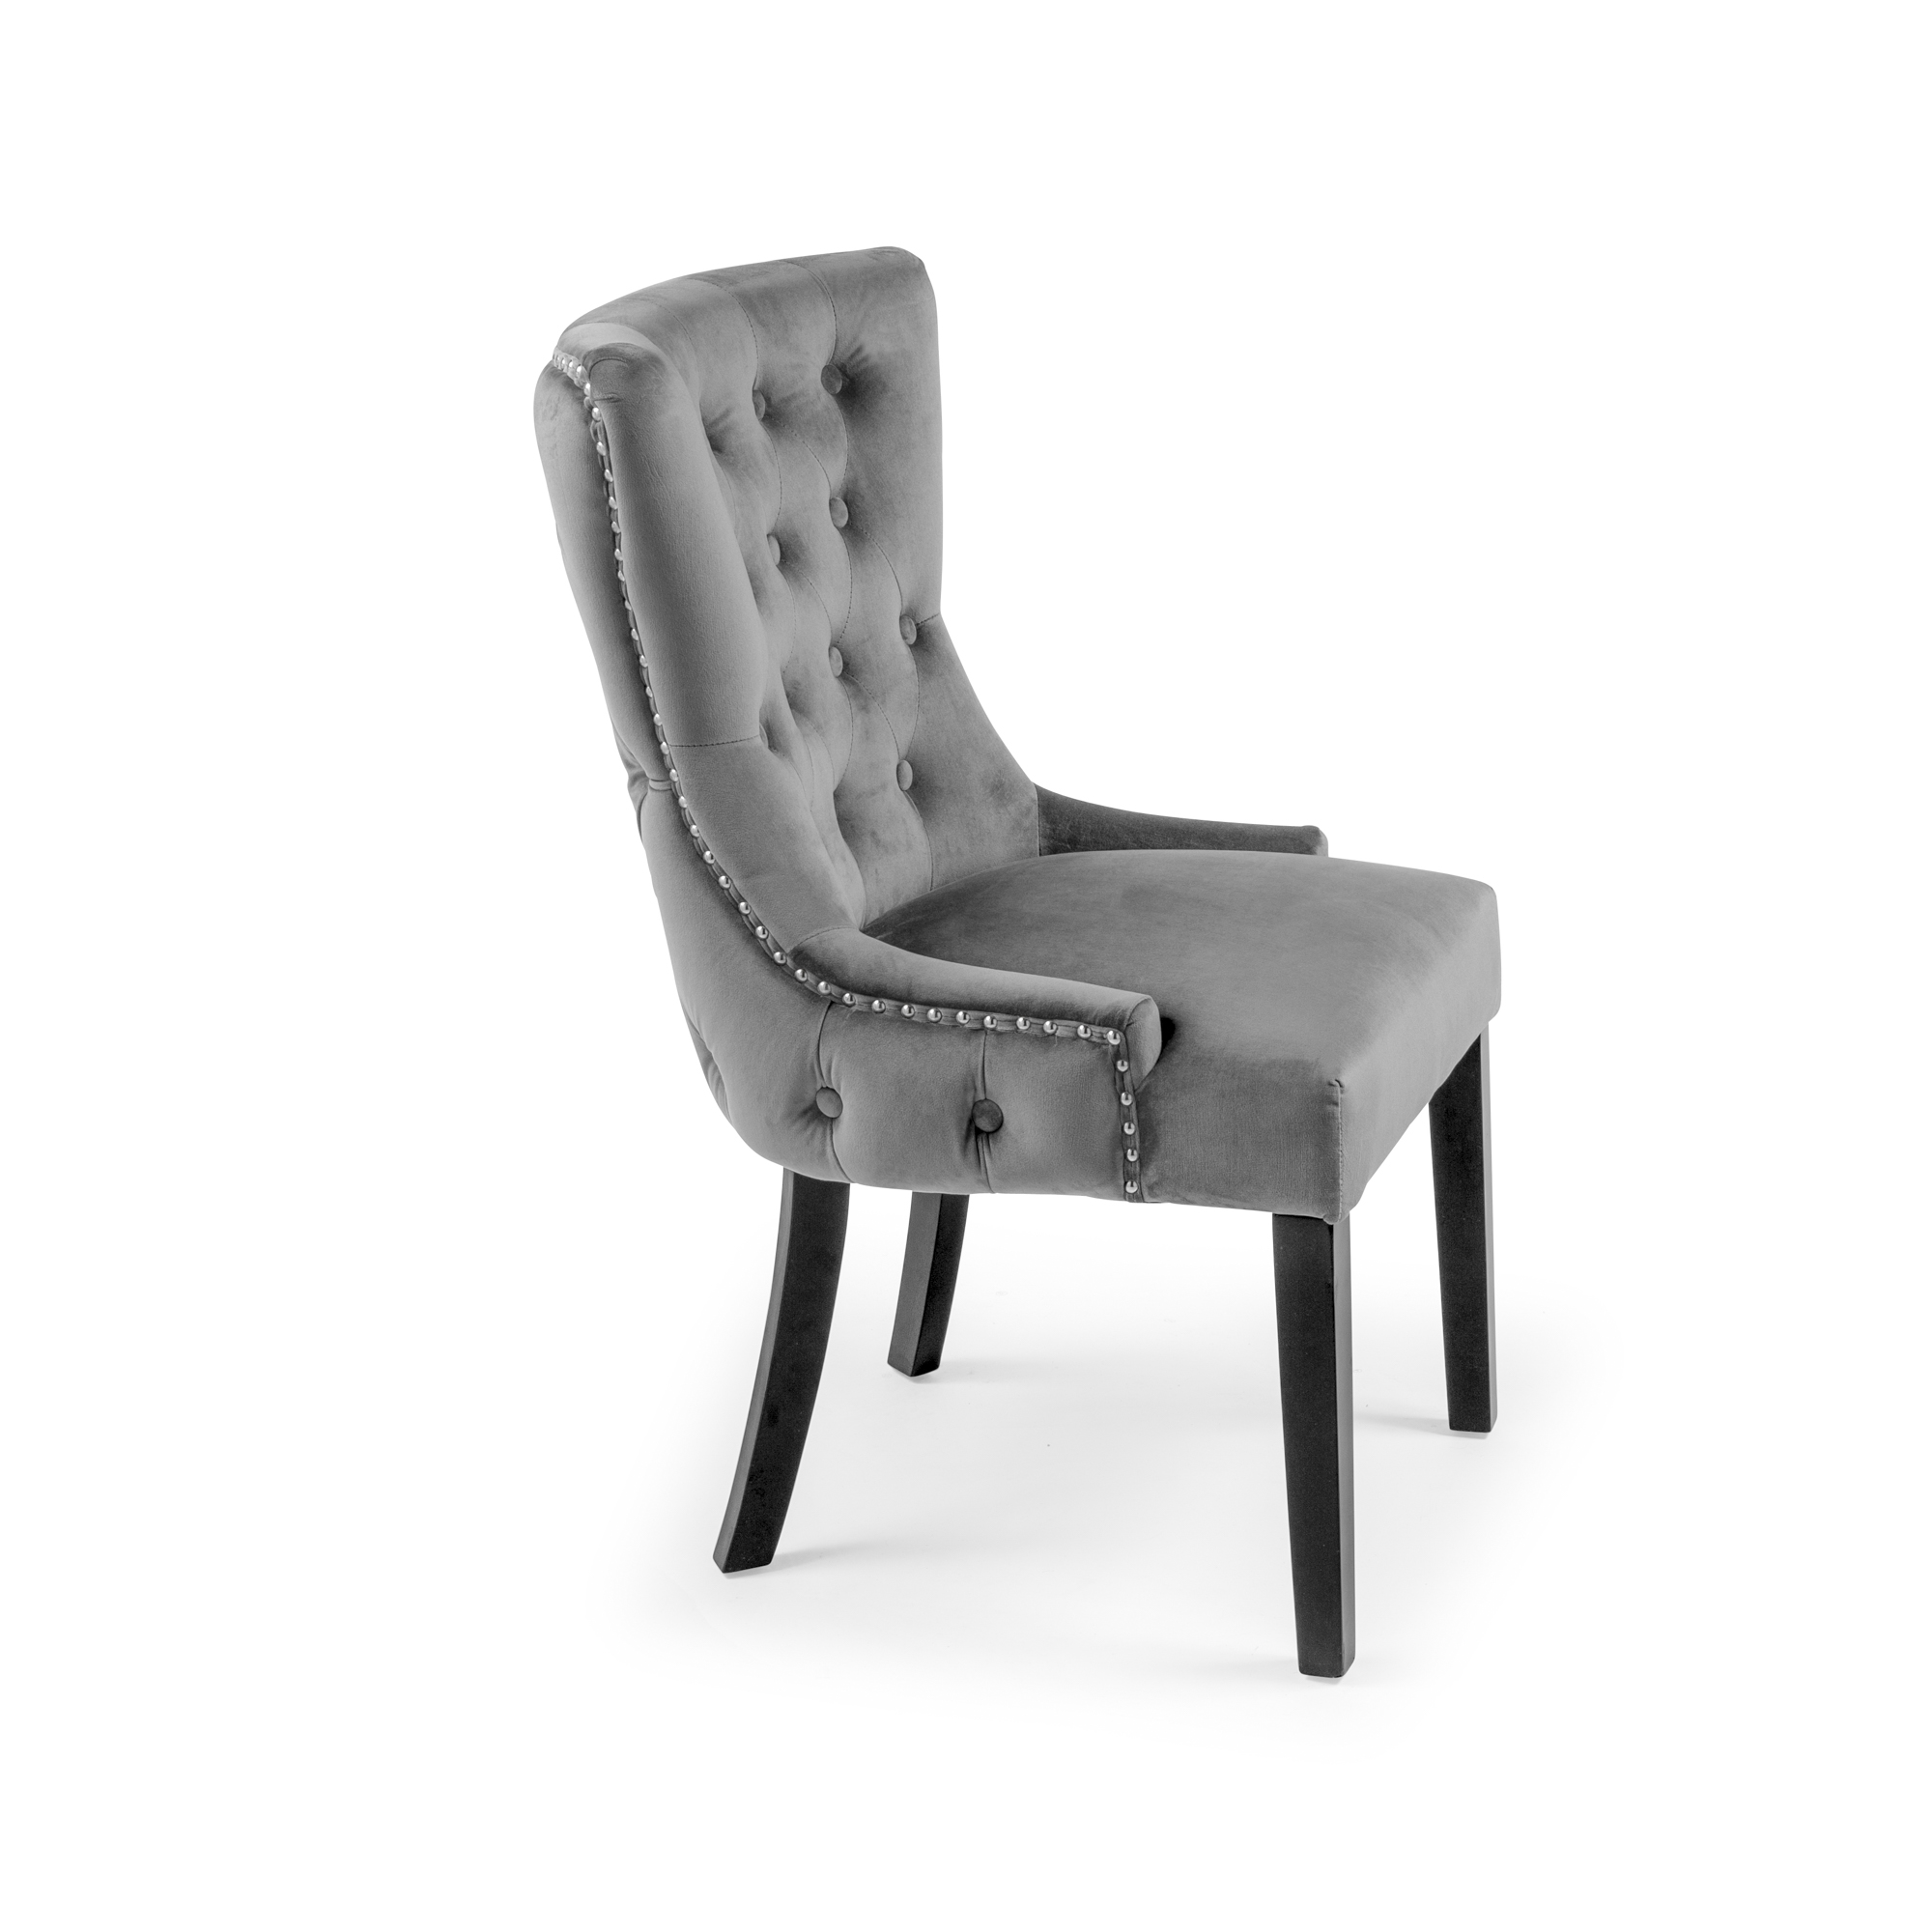 Knightsbridge Buttoned Grey Brushed Velvet Dining Chair with Black Legs